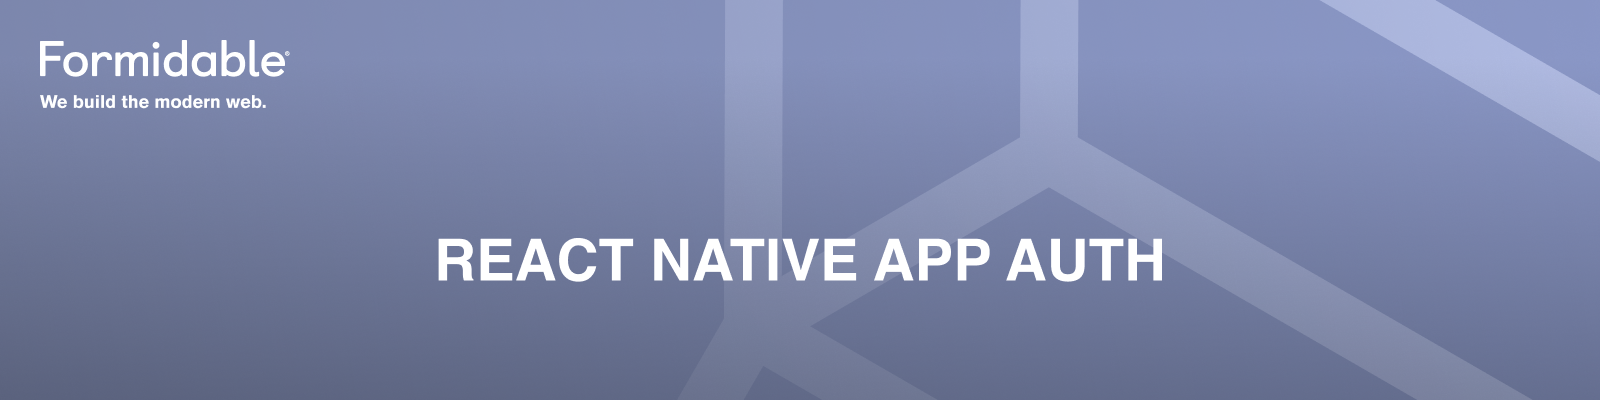 React Native App Auth — Formidable, We build the modern web